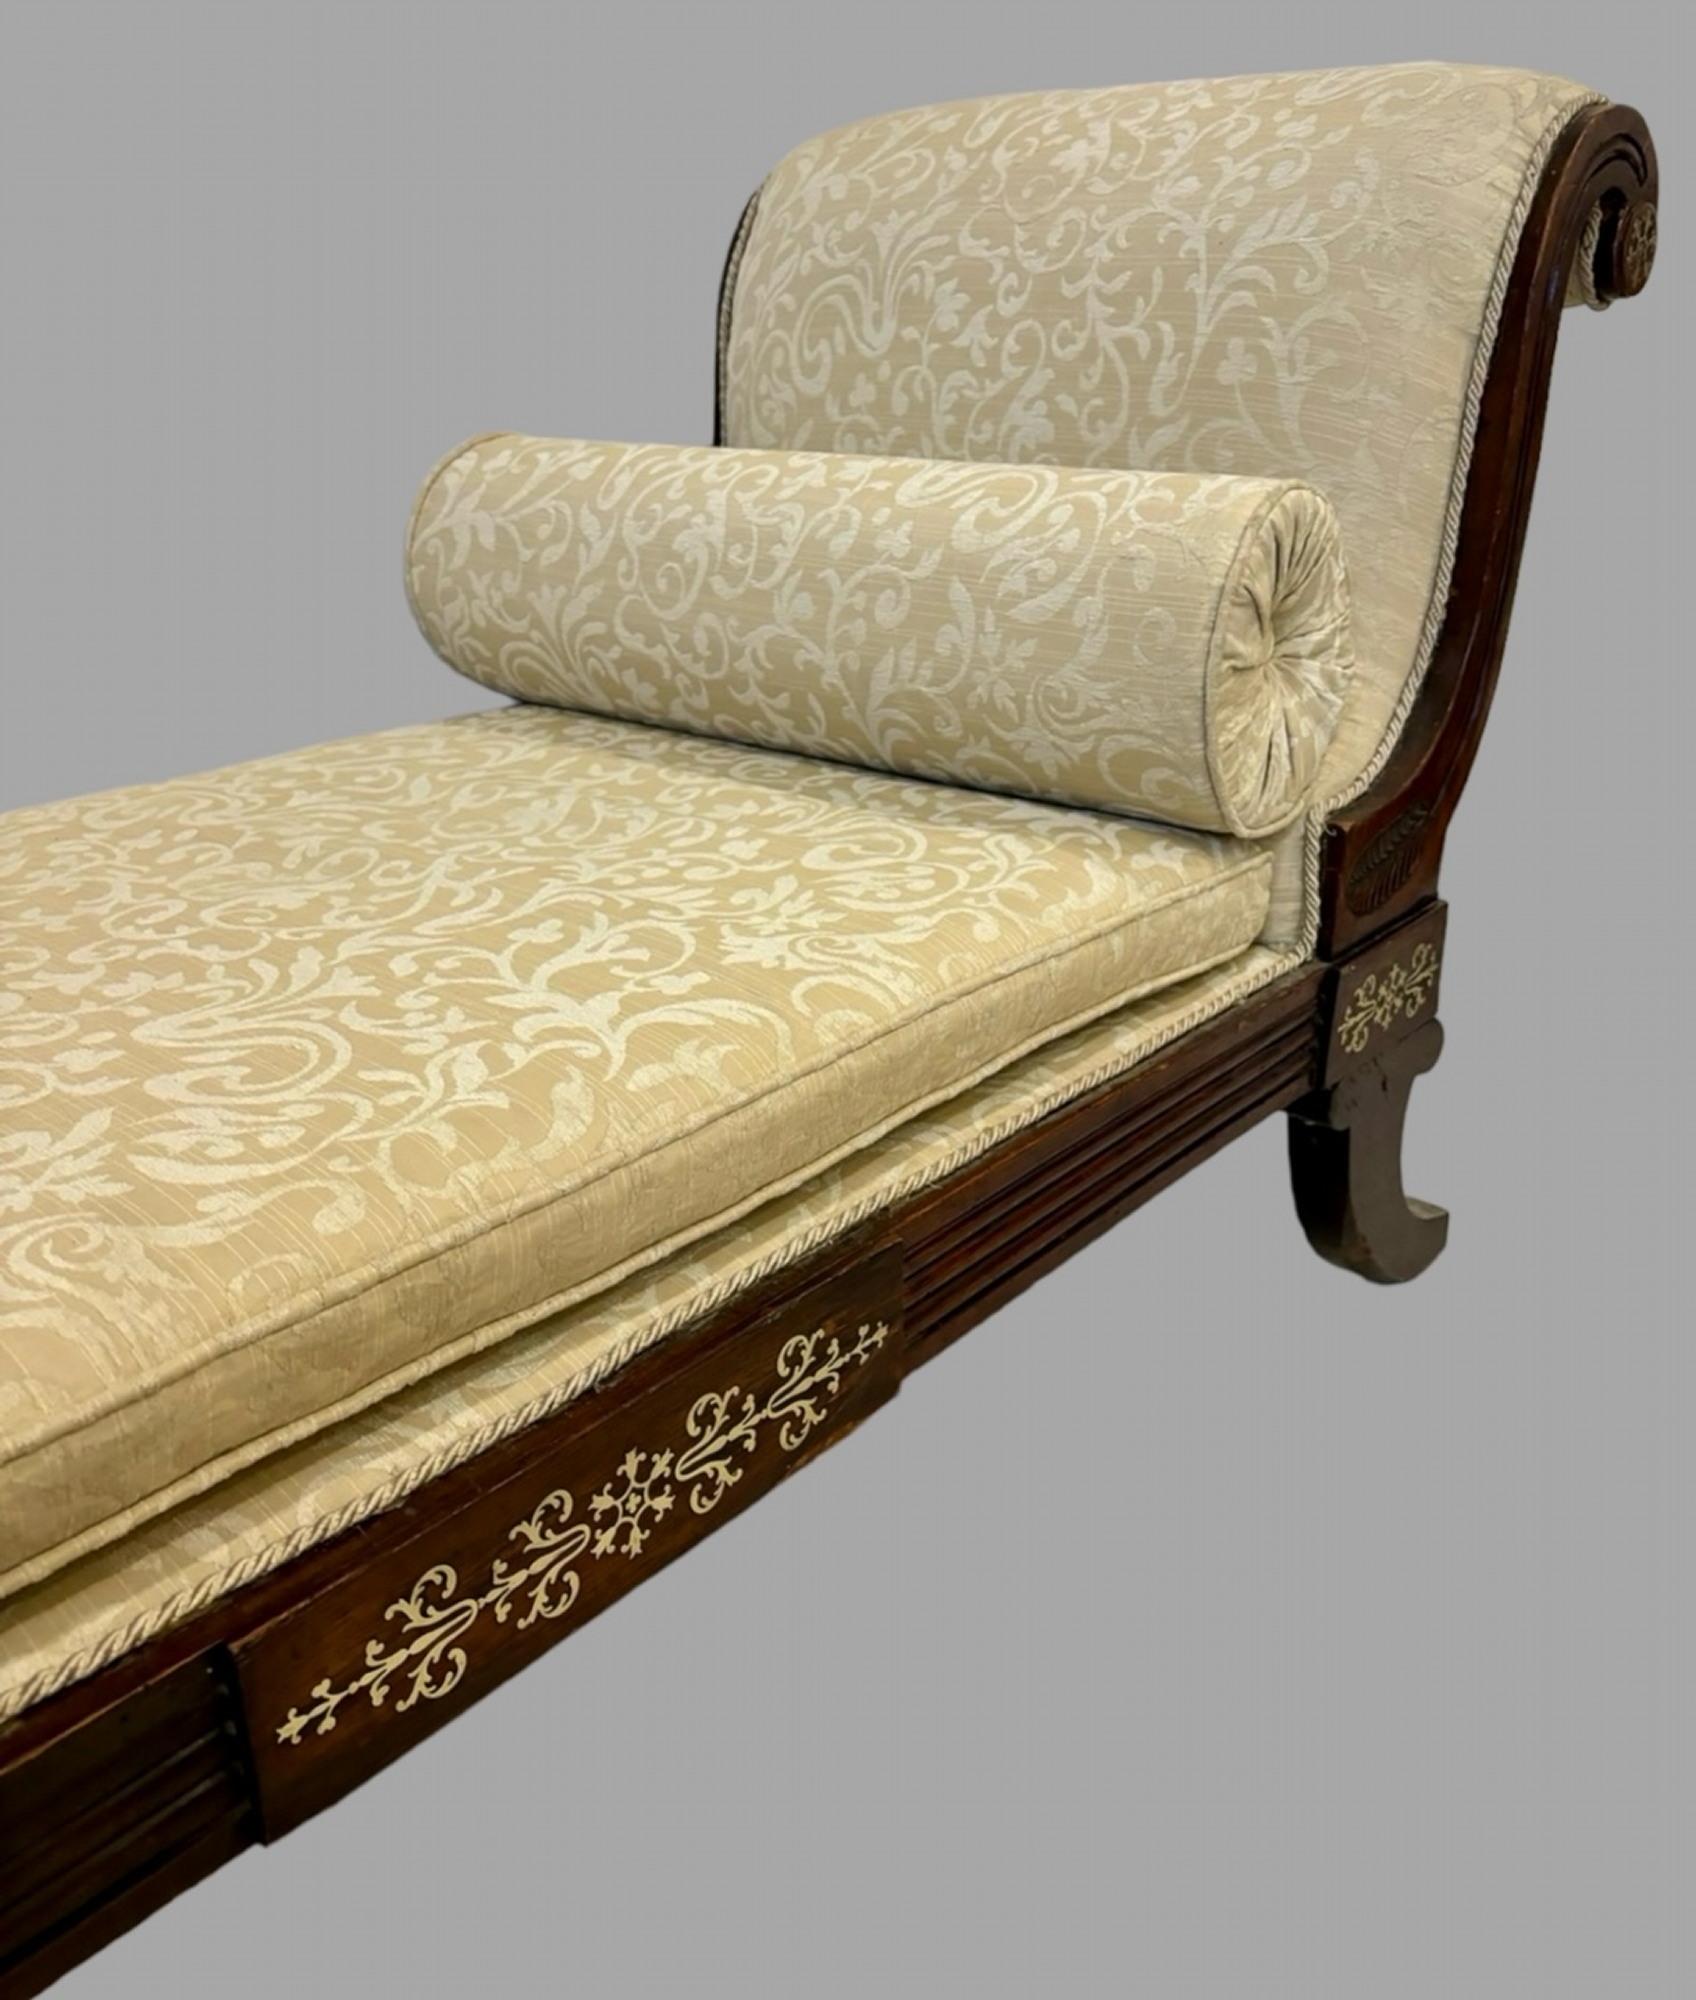 A Lovely Georgian Regency Daybed/Chaise Longue In Good Condition For Sale In Pewsey, GB